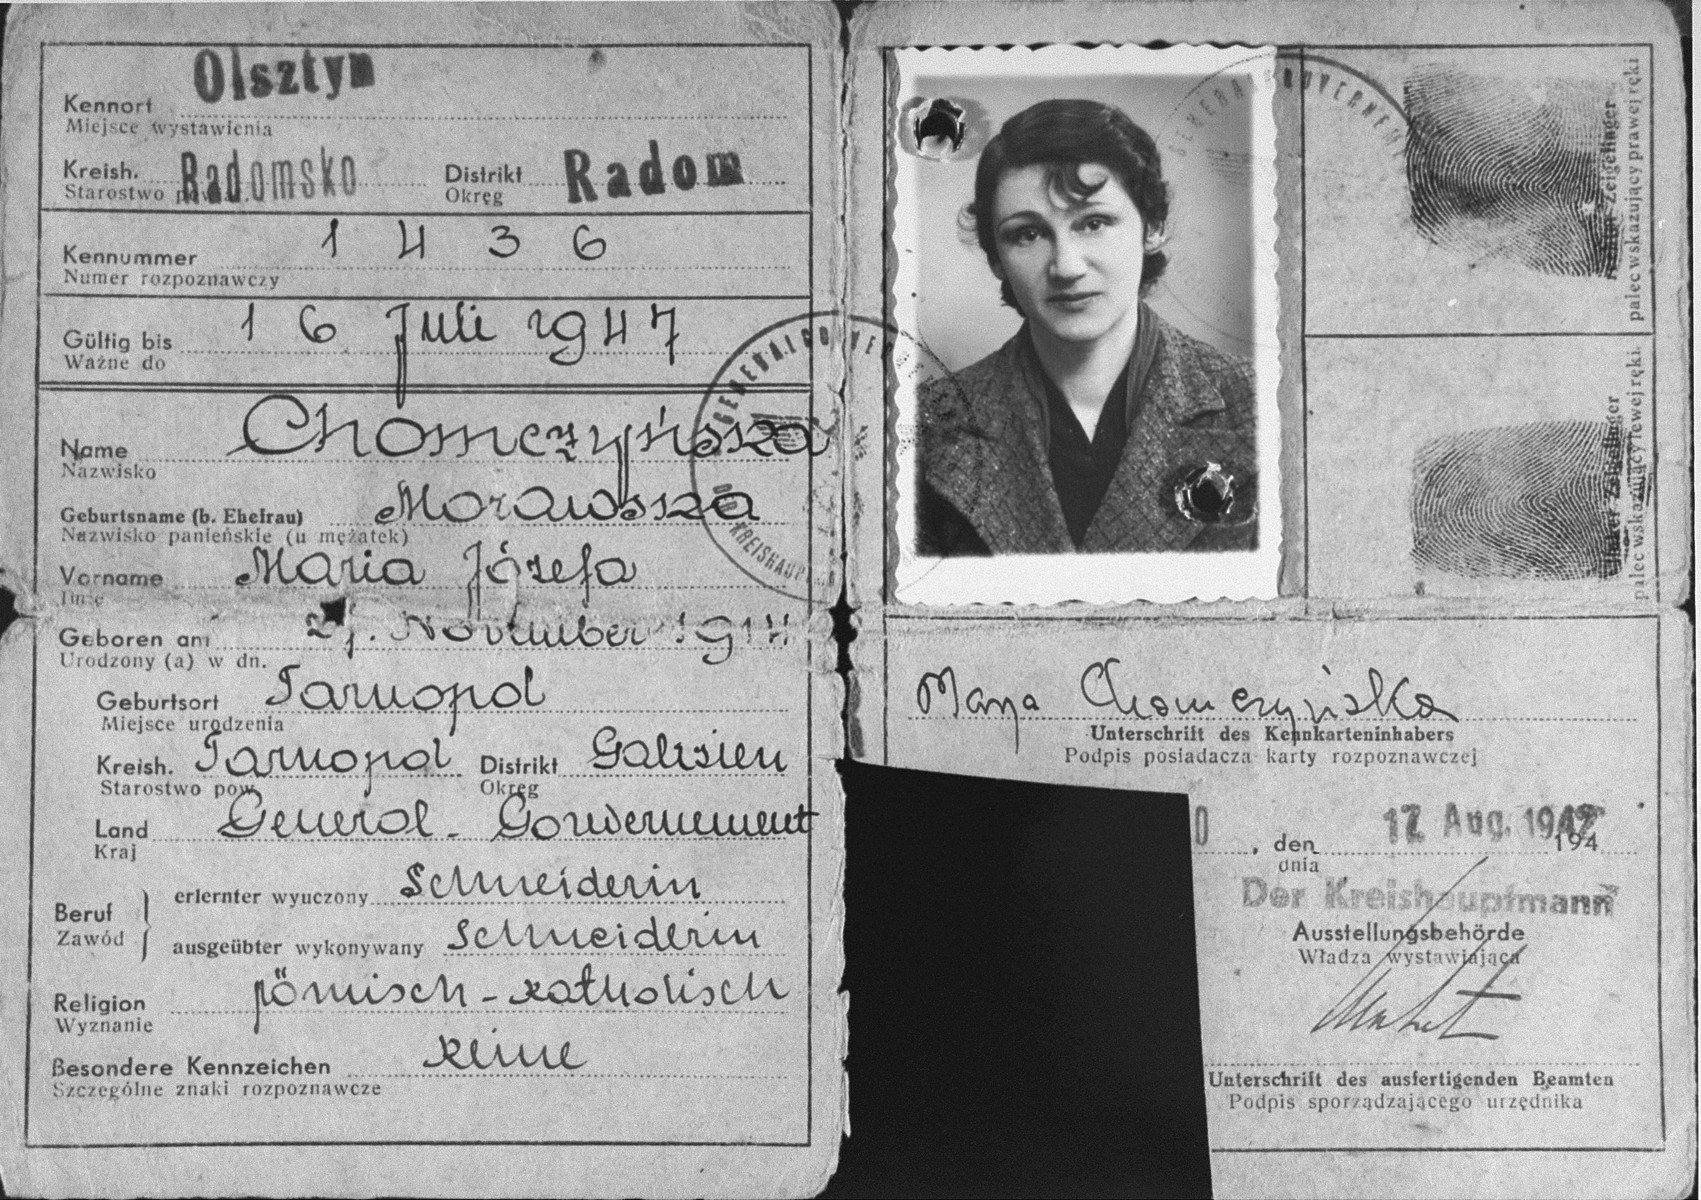 False identification papers used by the donor's wife, Maria Minc Morgenstern, during her years of hiding in occupied Poland.  Minc lived under the assumed name of Maria Chomczynski.